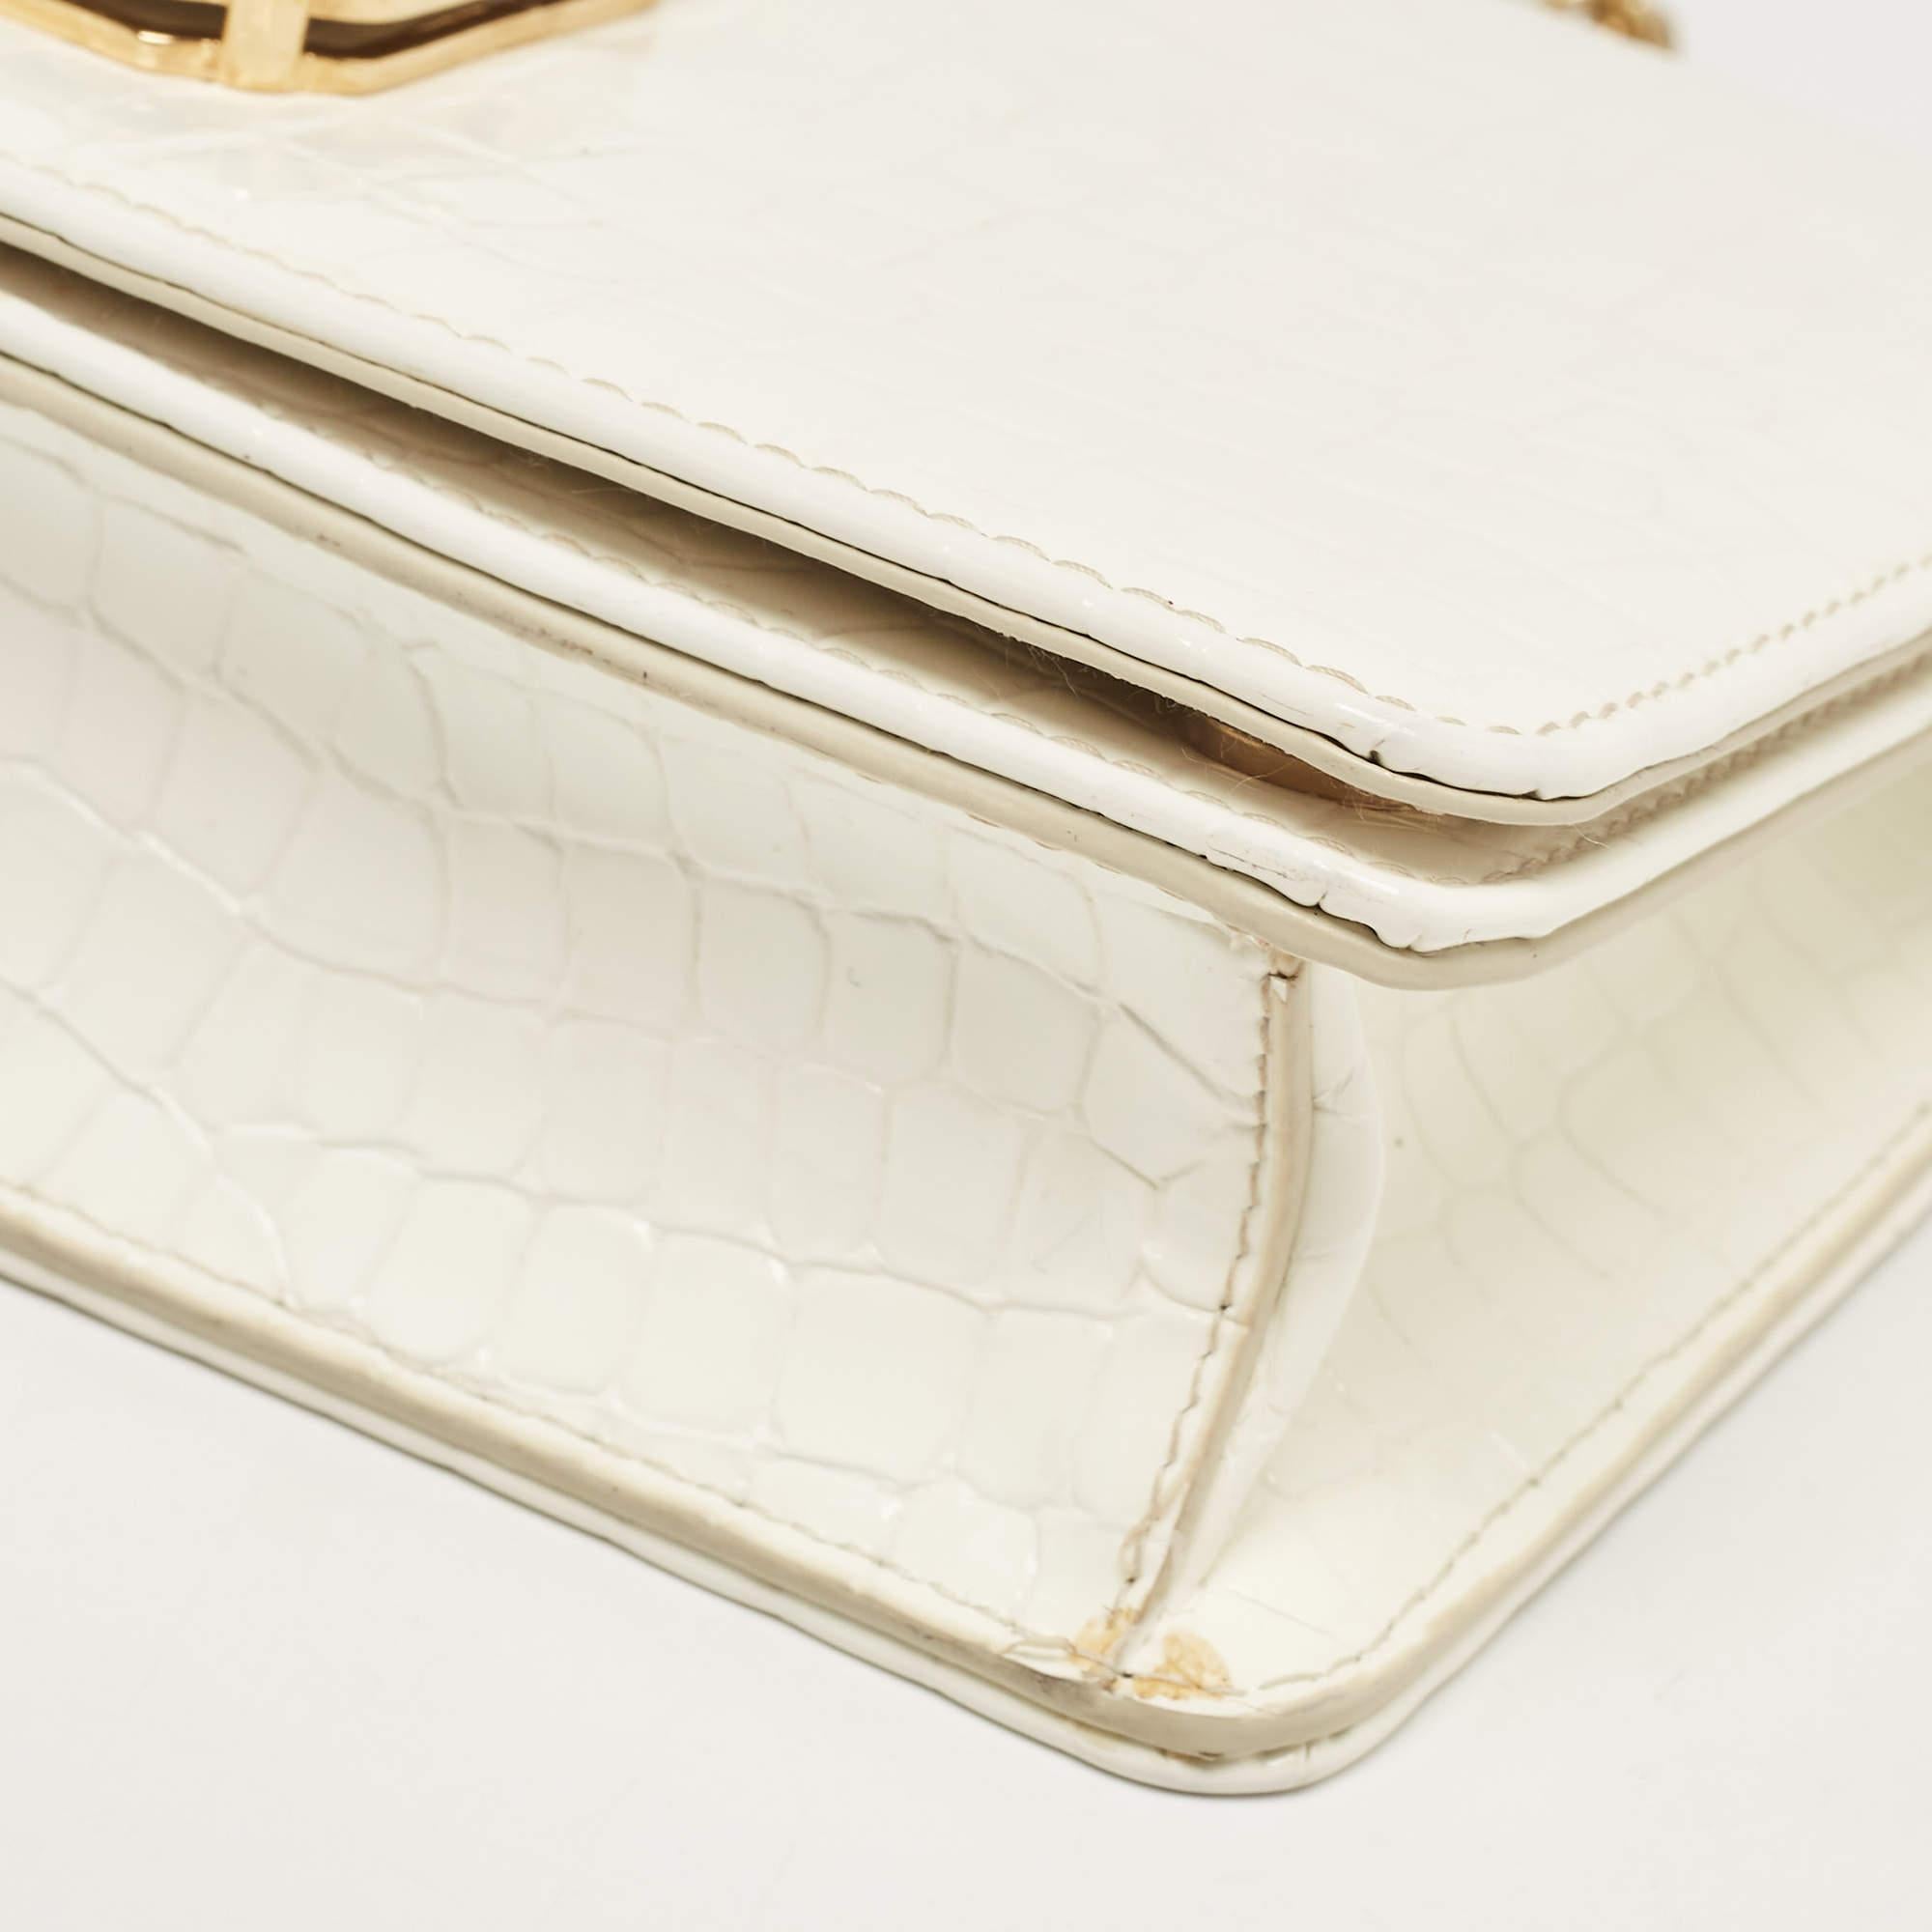 Miu Miu Off White Croc Embossed Leather Crystal Embellished Chain Clutch For Sale 10